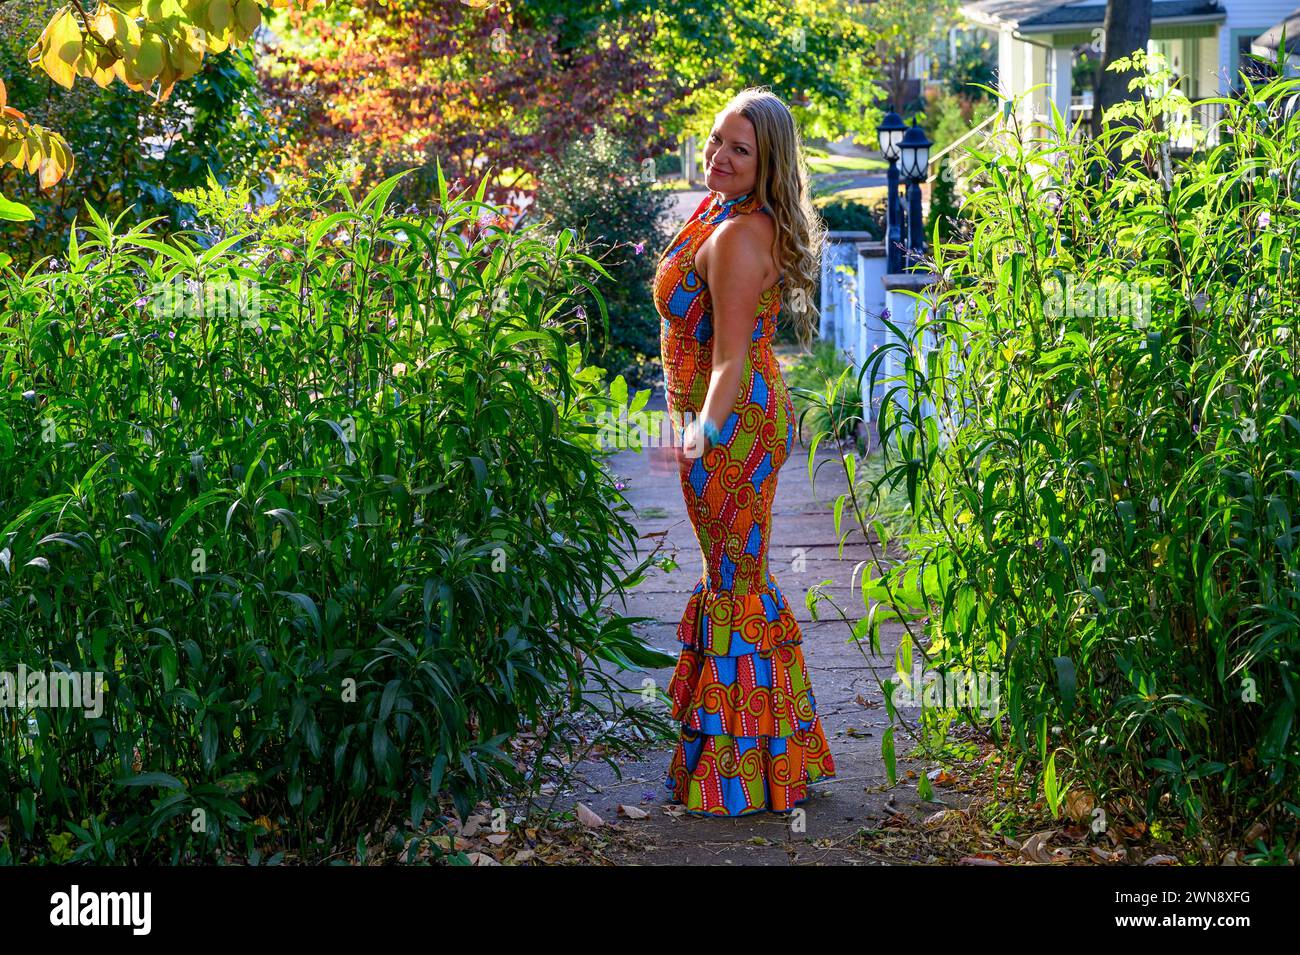 40 year old blond woman posing in a colorful dress outdoors. Stock Photo